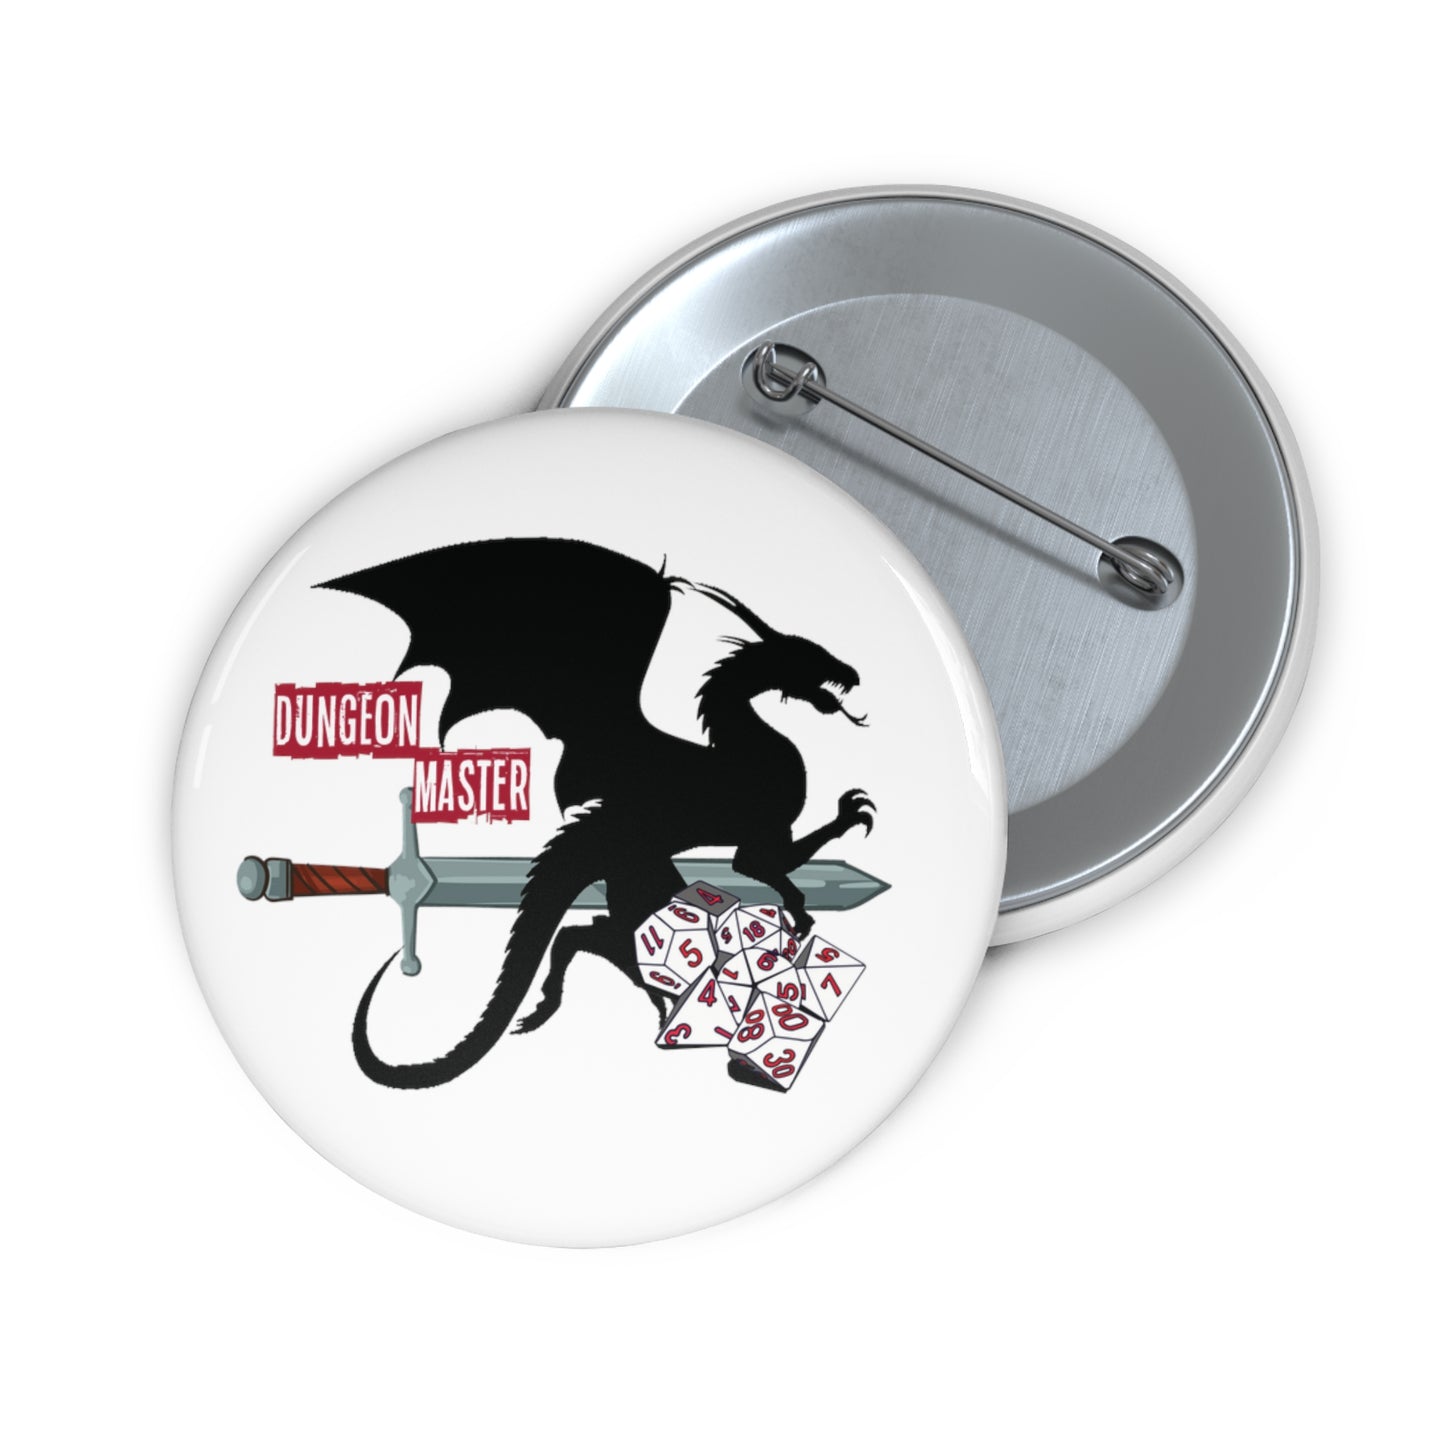 Dungeon Master -  Pin Buttons ( DM )